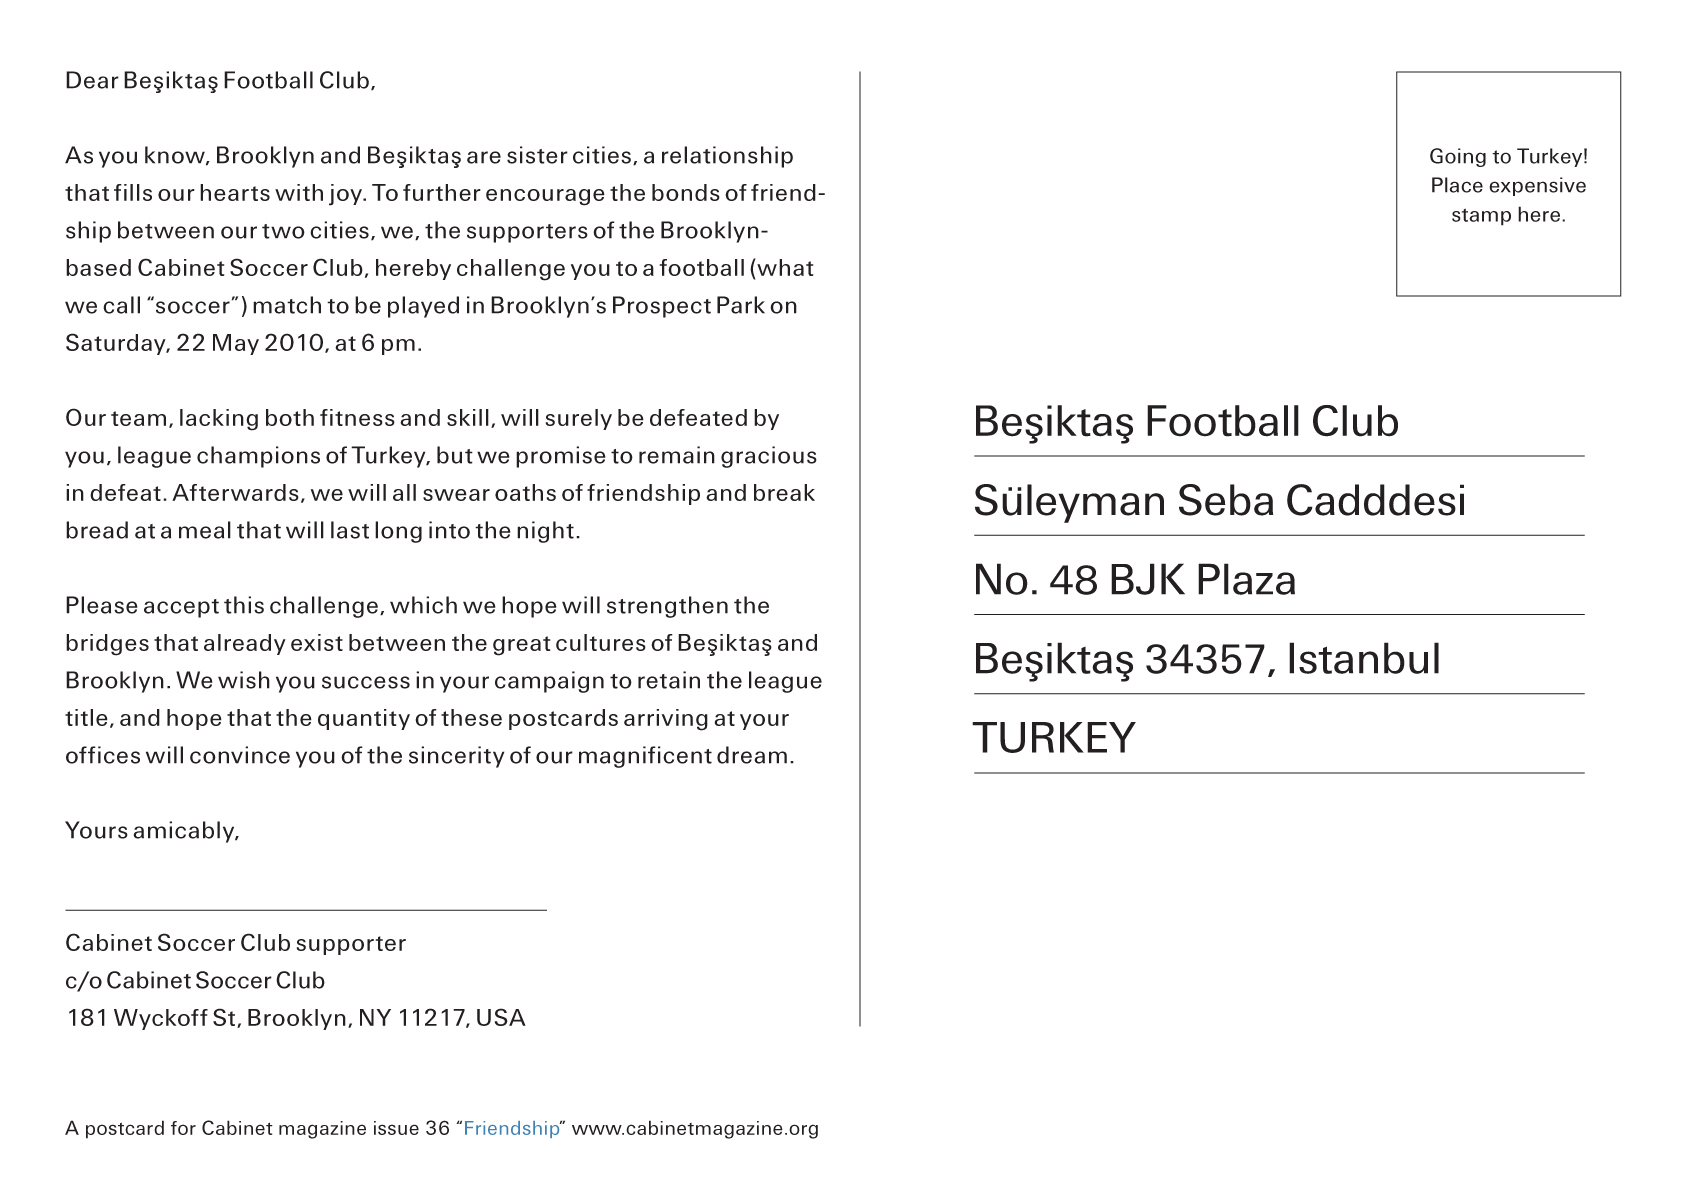 The back of a postcard from the Cabinet Soccer Club inviting the Beşiktaş Football Club to a match. 